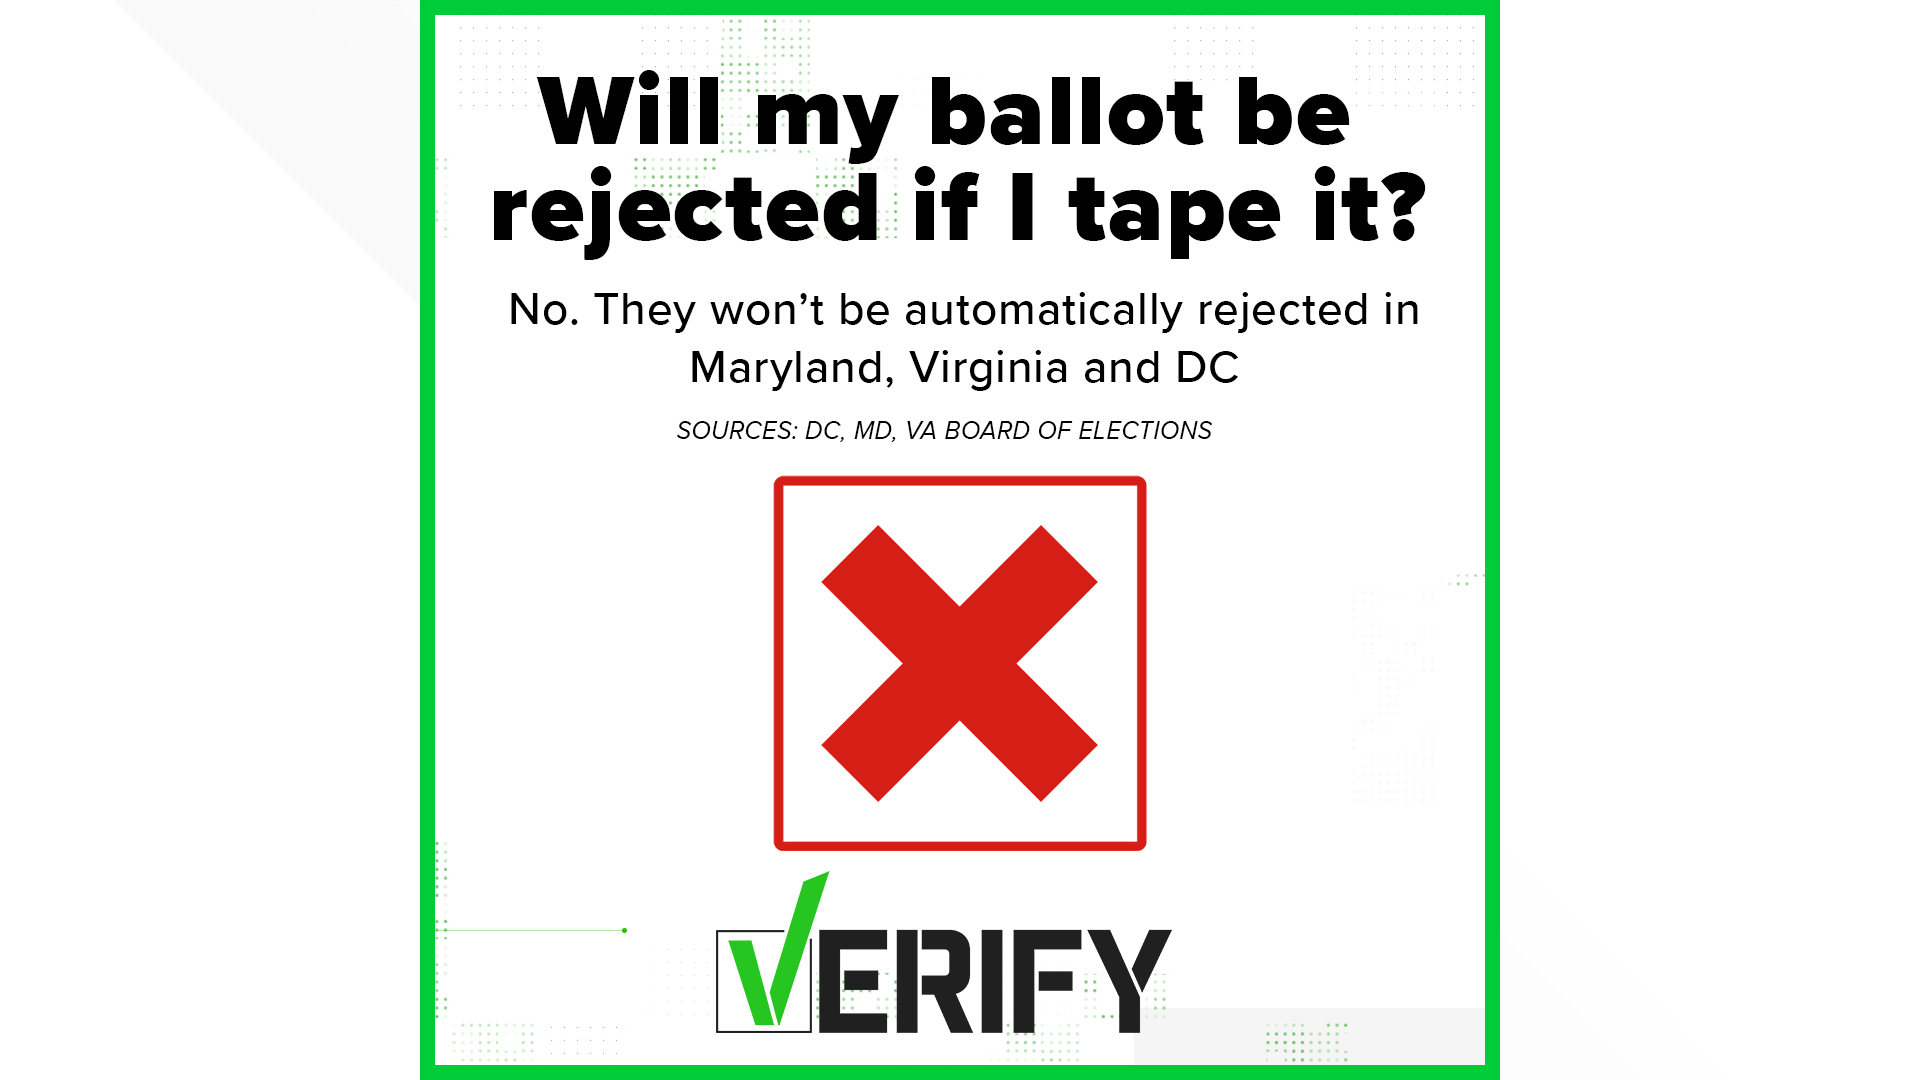 Posts online claim that if you tape your ballot shut instead of sealing by licking it, your ballot will be rejected. Local officials said that's not true.